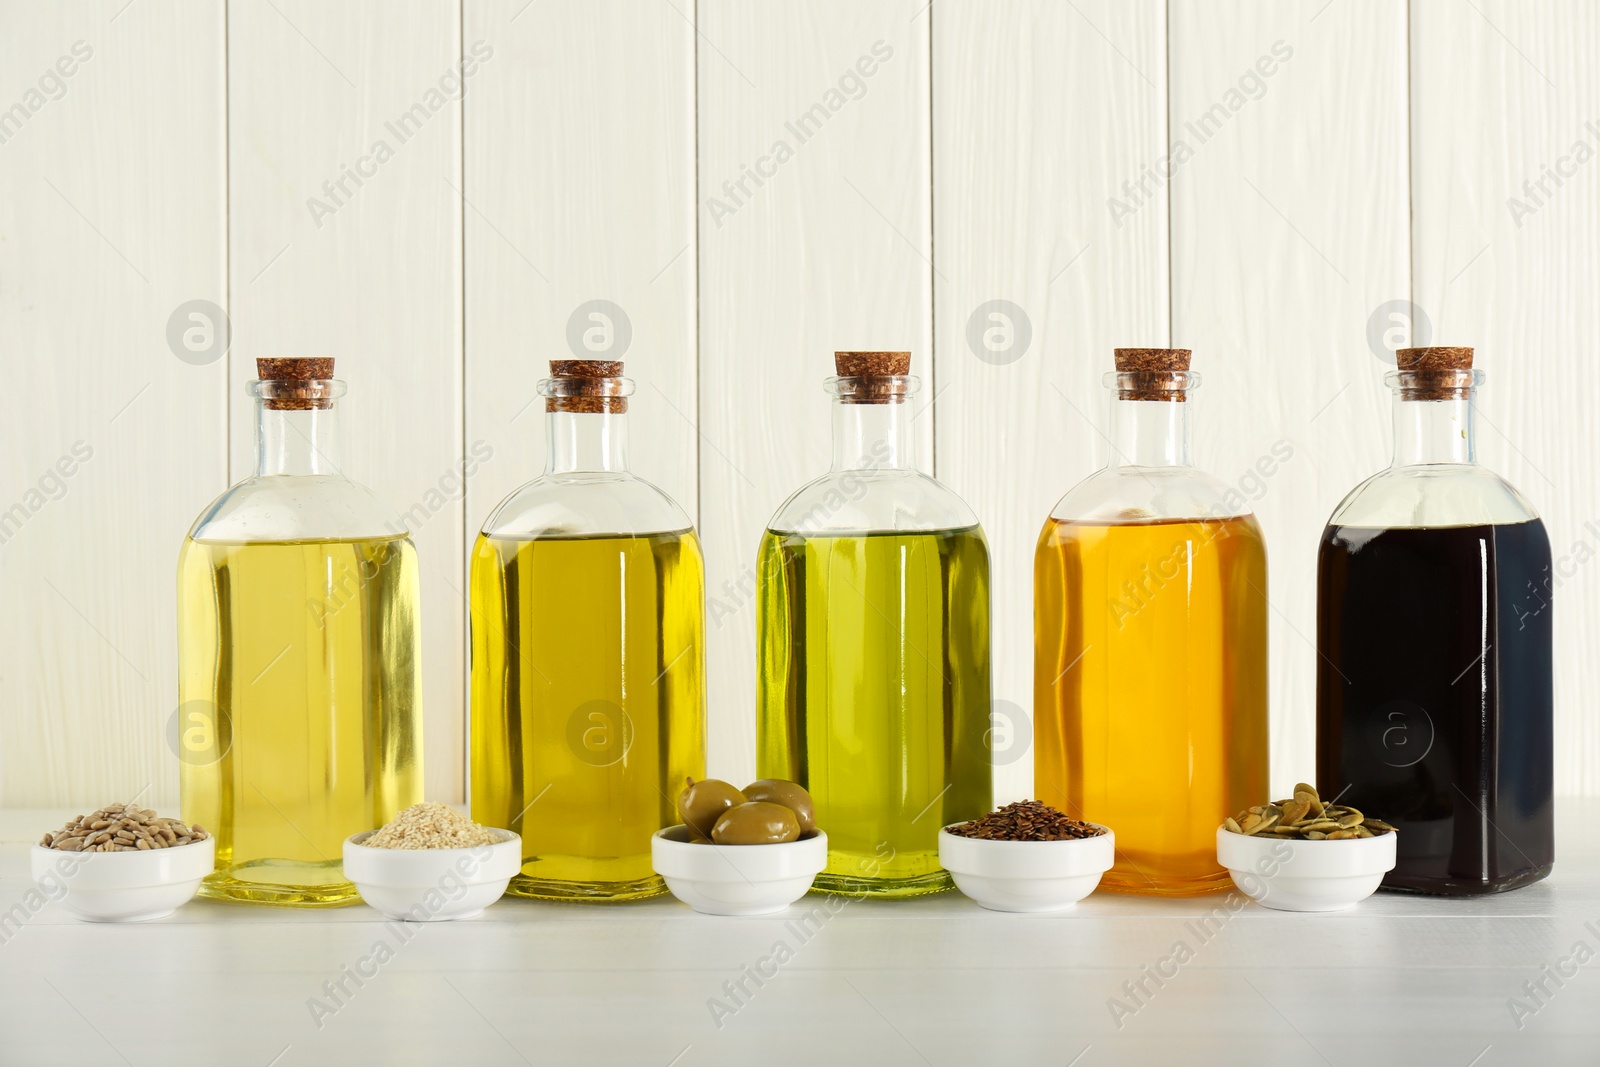 Photo of Vegetable fats. Different cooking oils in glass bottles and ingredients on white wooden table